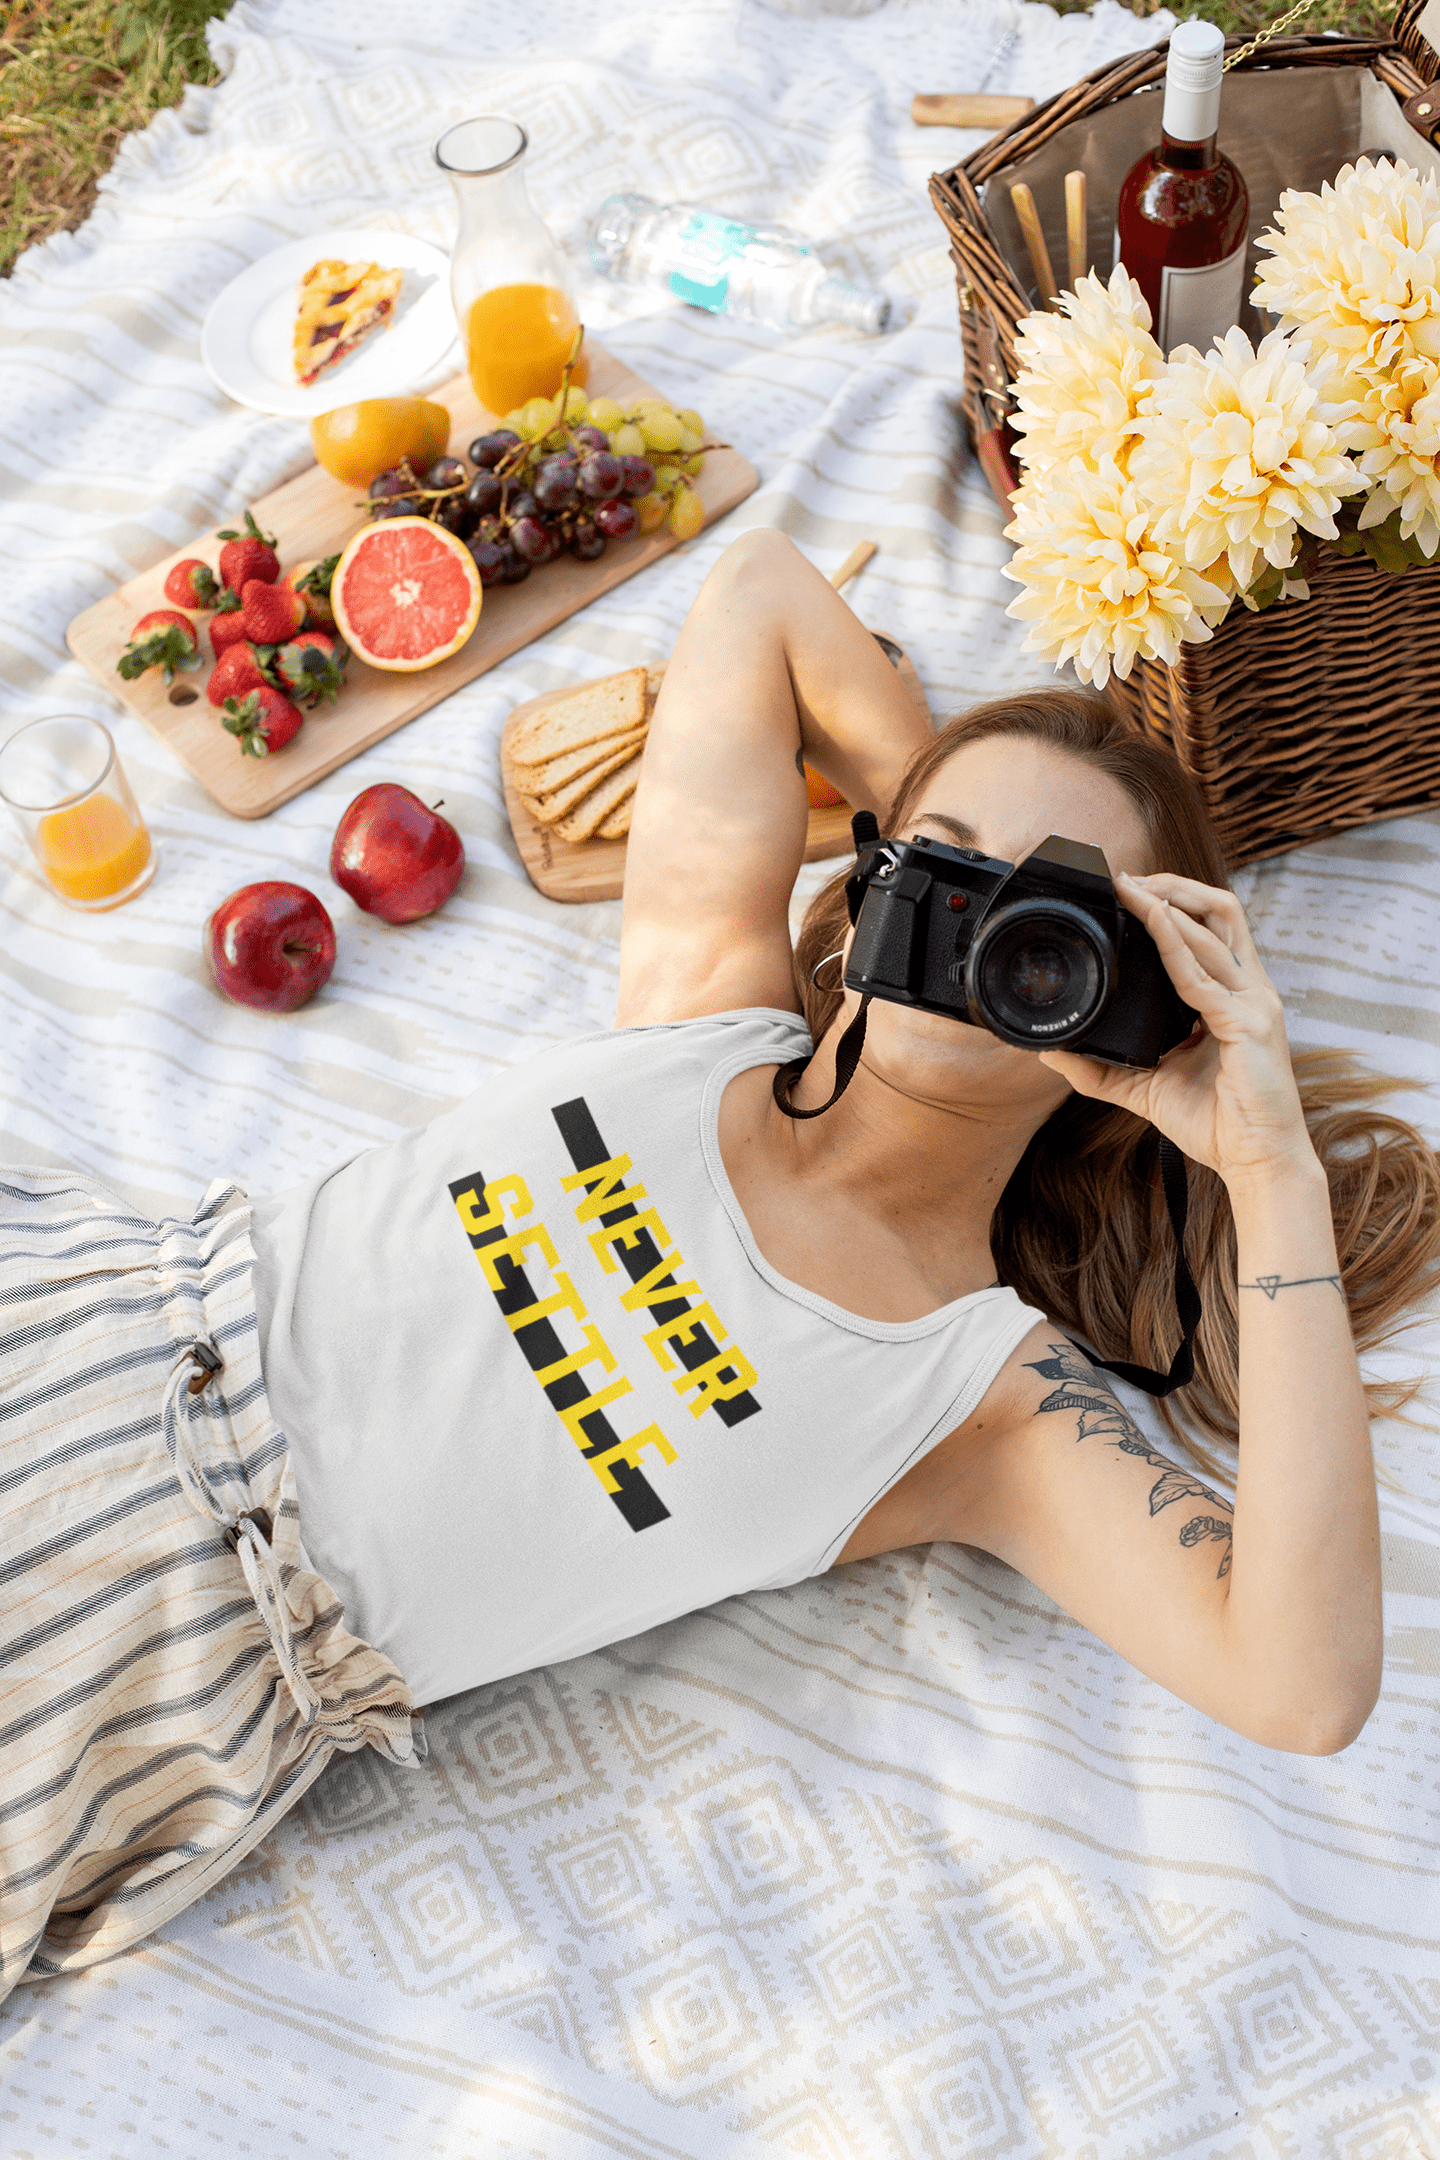 Never Settle Statement Women's Racerback Tank Tank Top A Moment Of Now Women’s Boutique Clothing Online Lifestyle Store